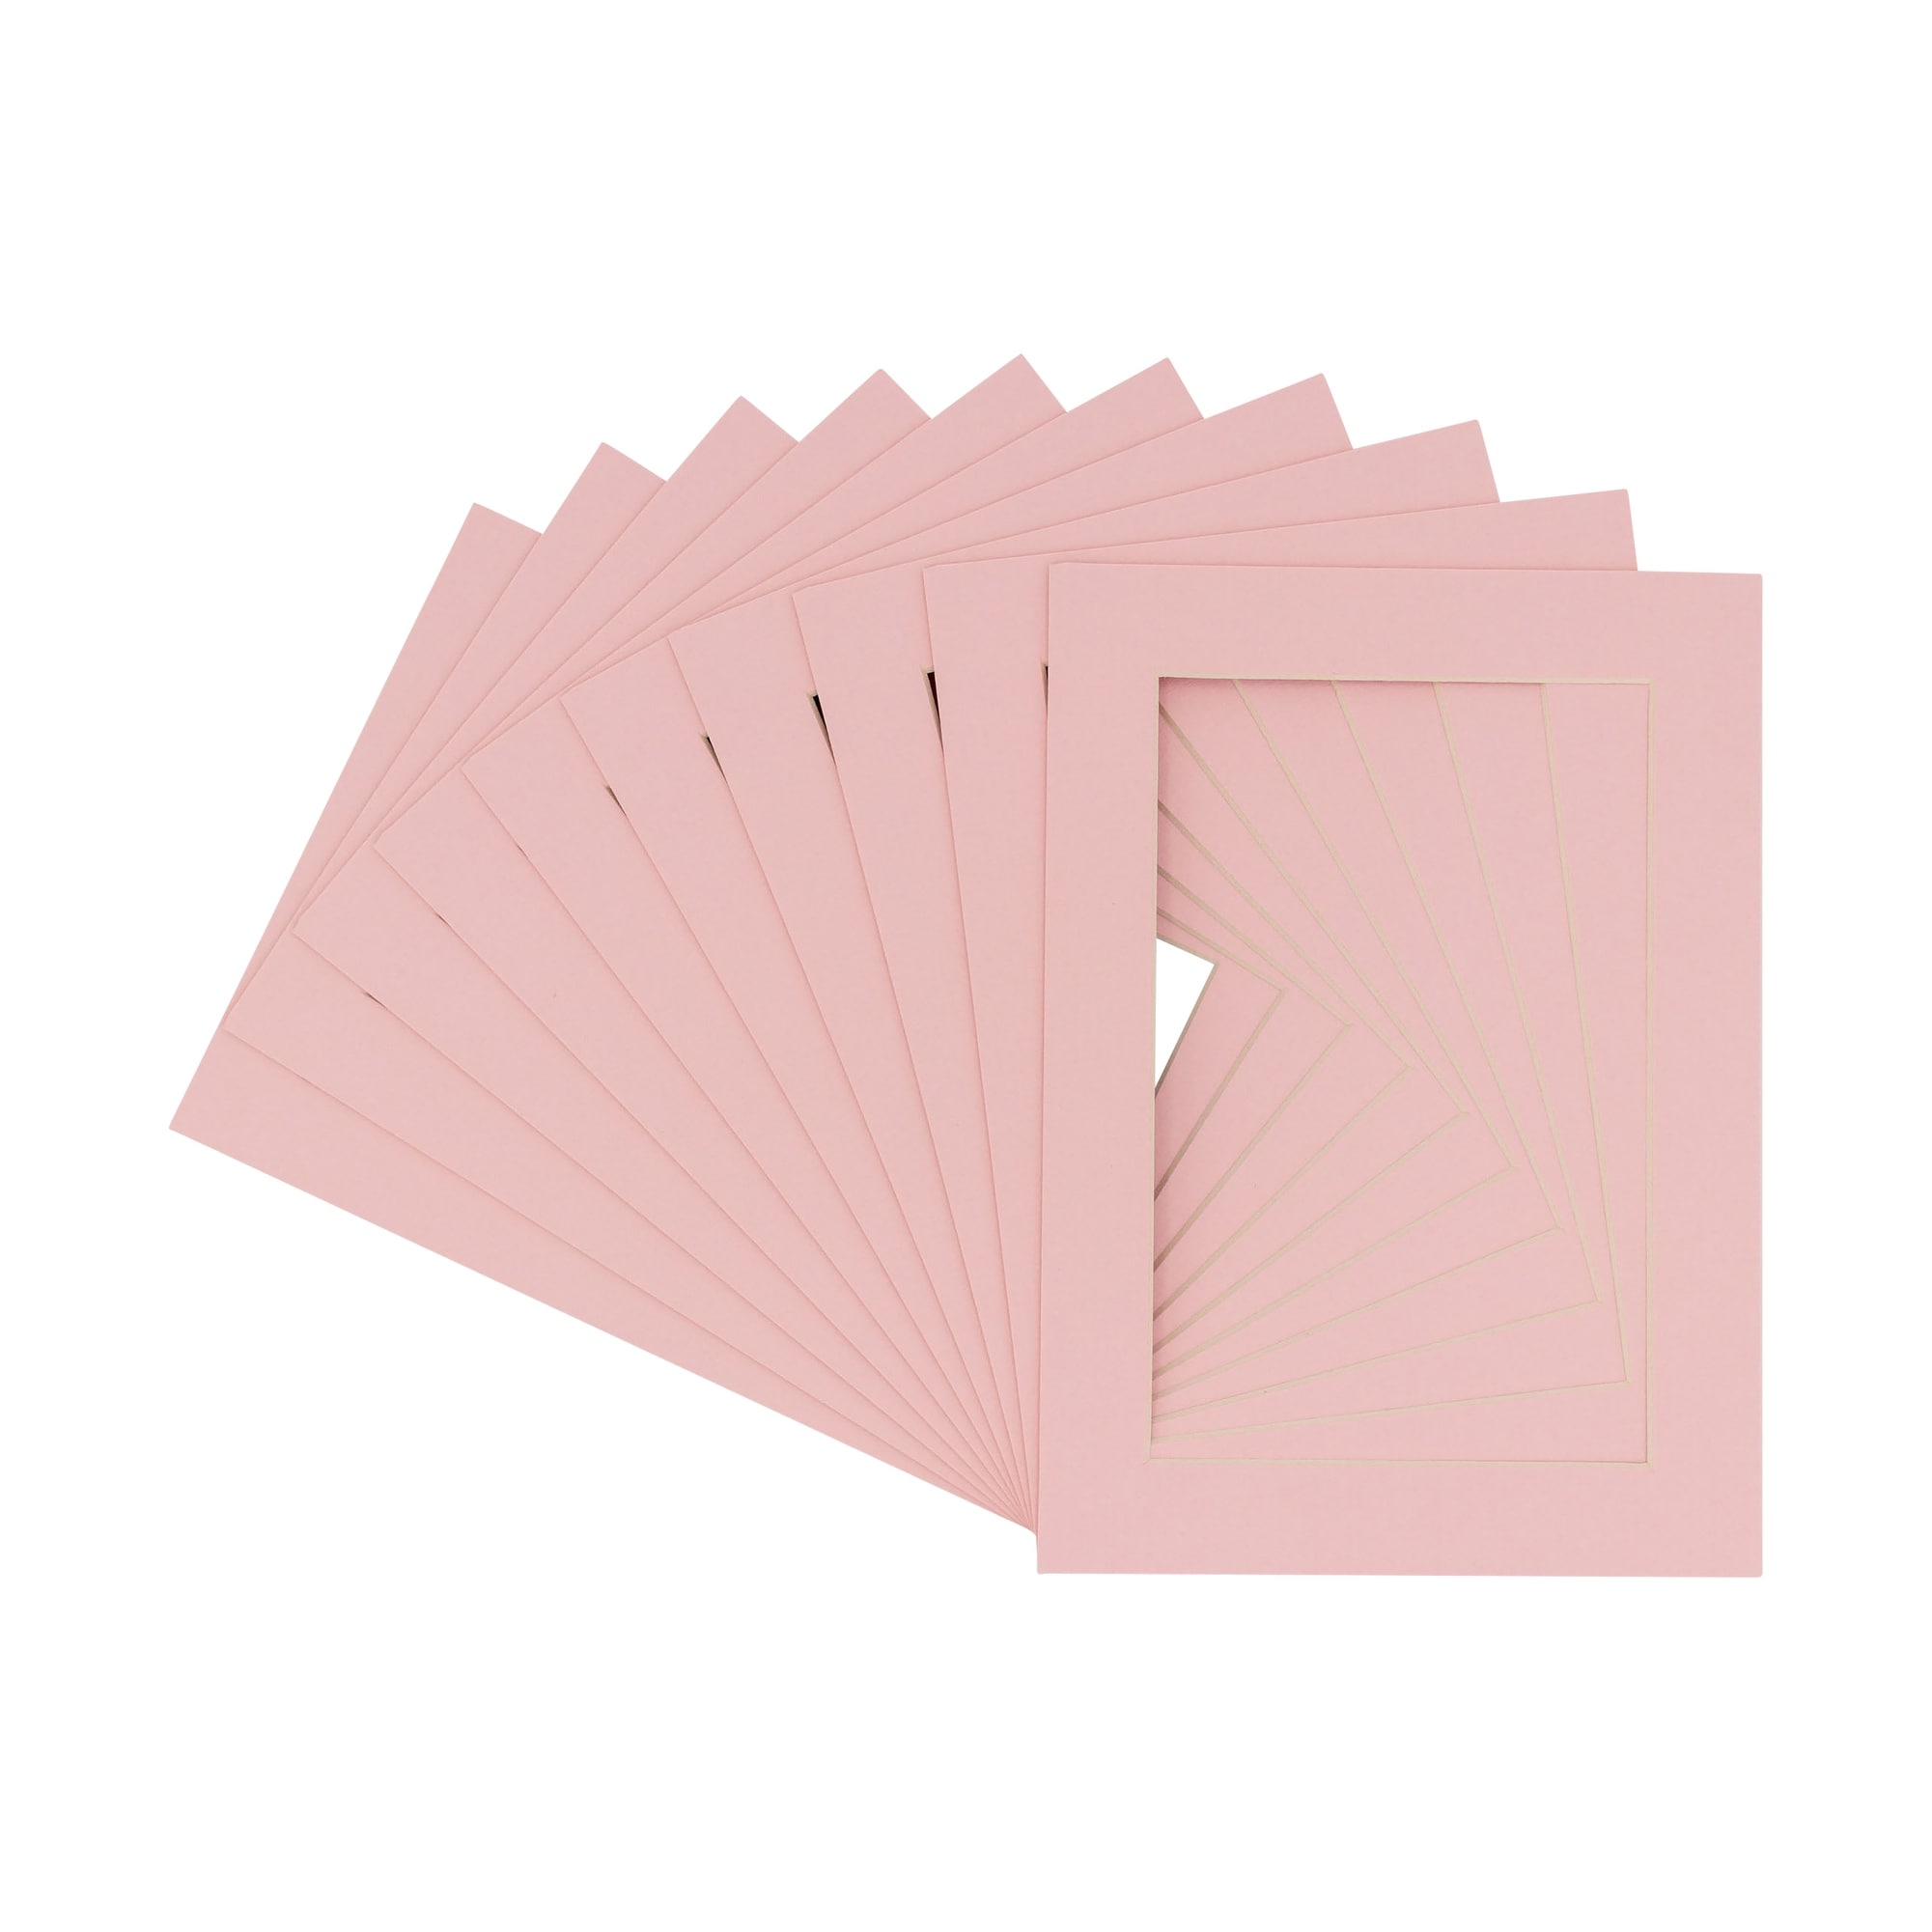 5x7 Mat for 8.5x11 Frame - Precut Mat Board Acid-Free Soft Pink 5x7 Photo Matte Made to Fit A 8.5x11 Picture Frame